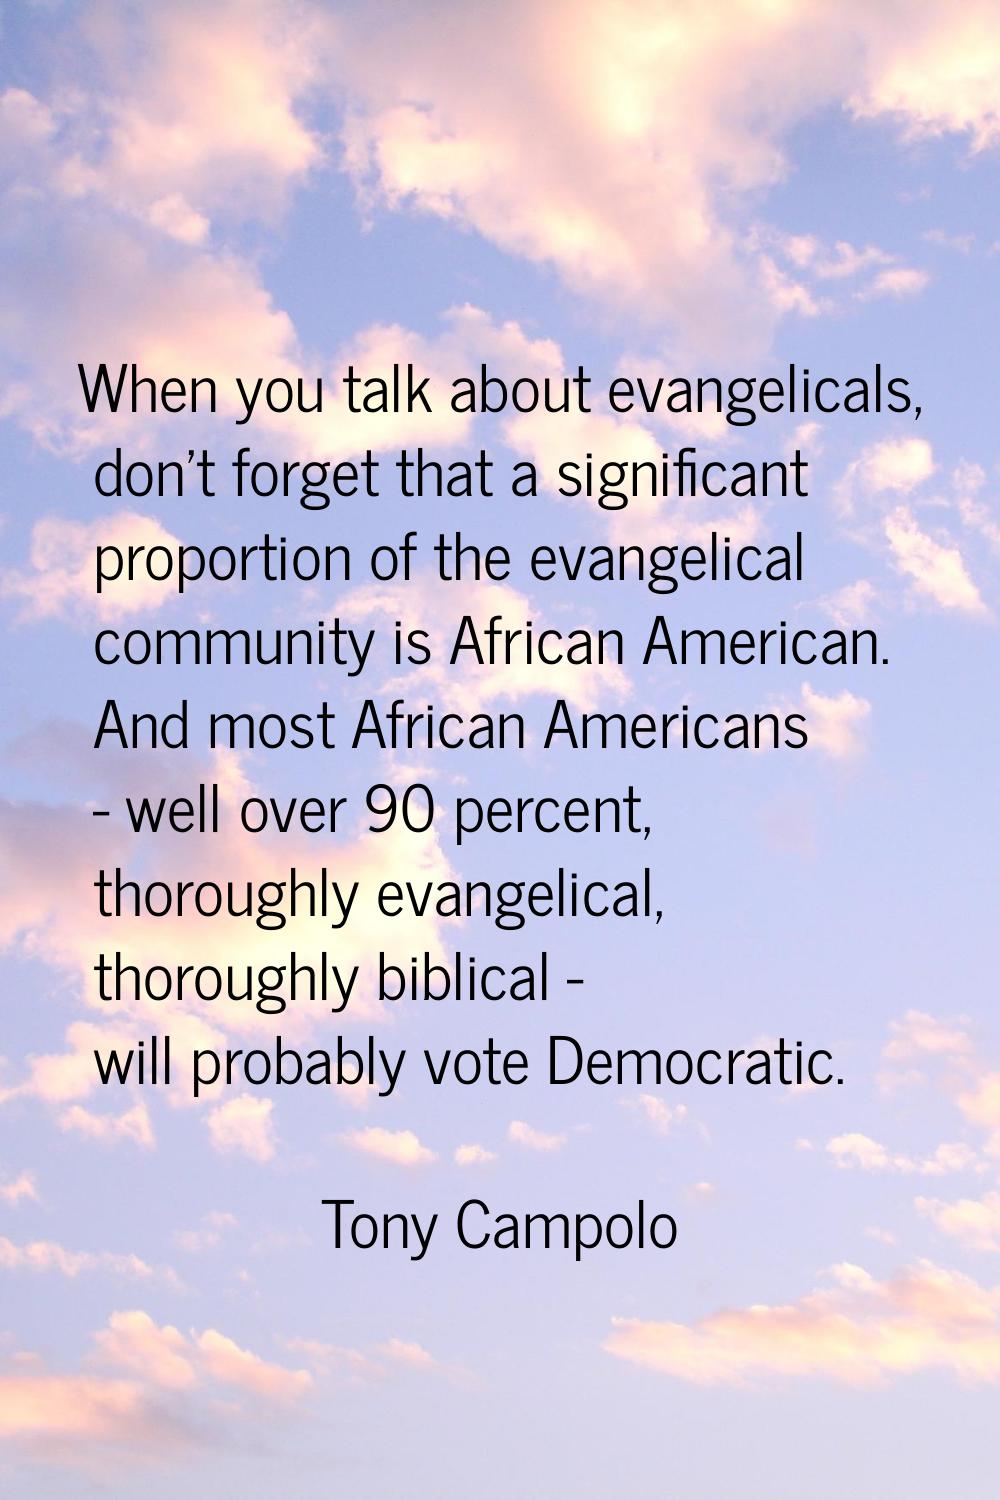 When you talk about evangelicals, don't forget that a significant proportion of the evangelical com